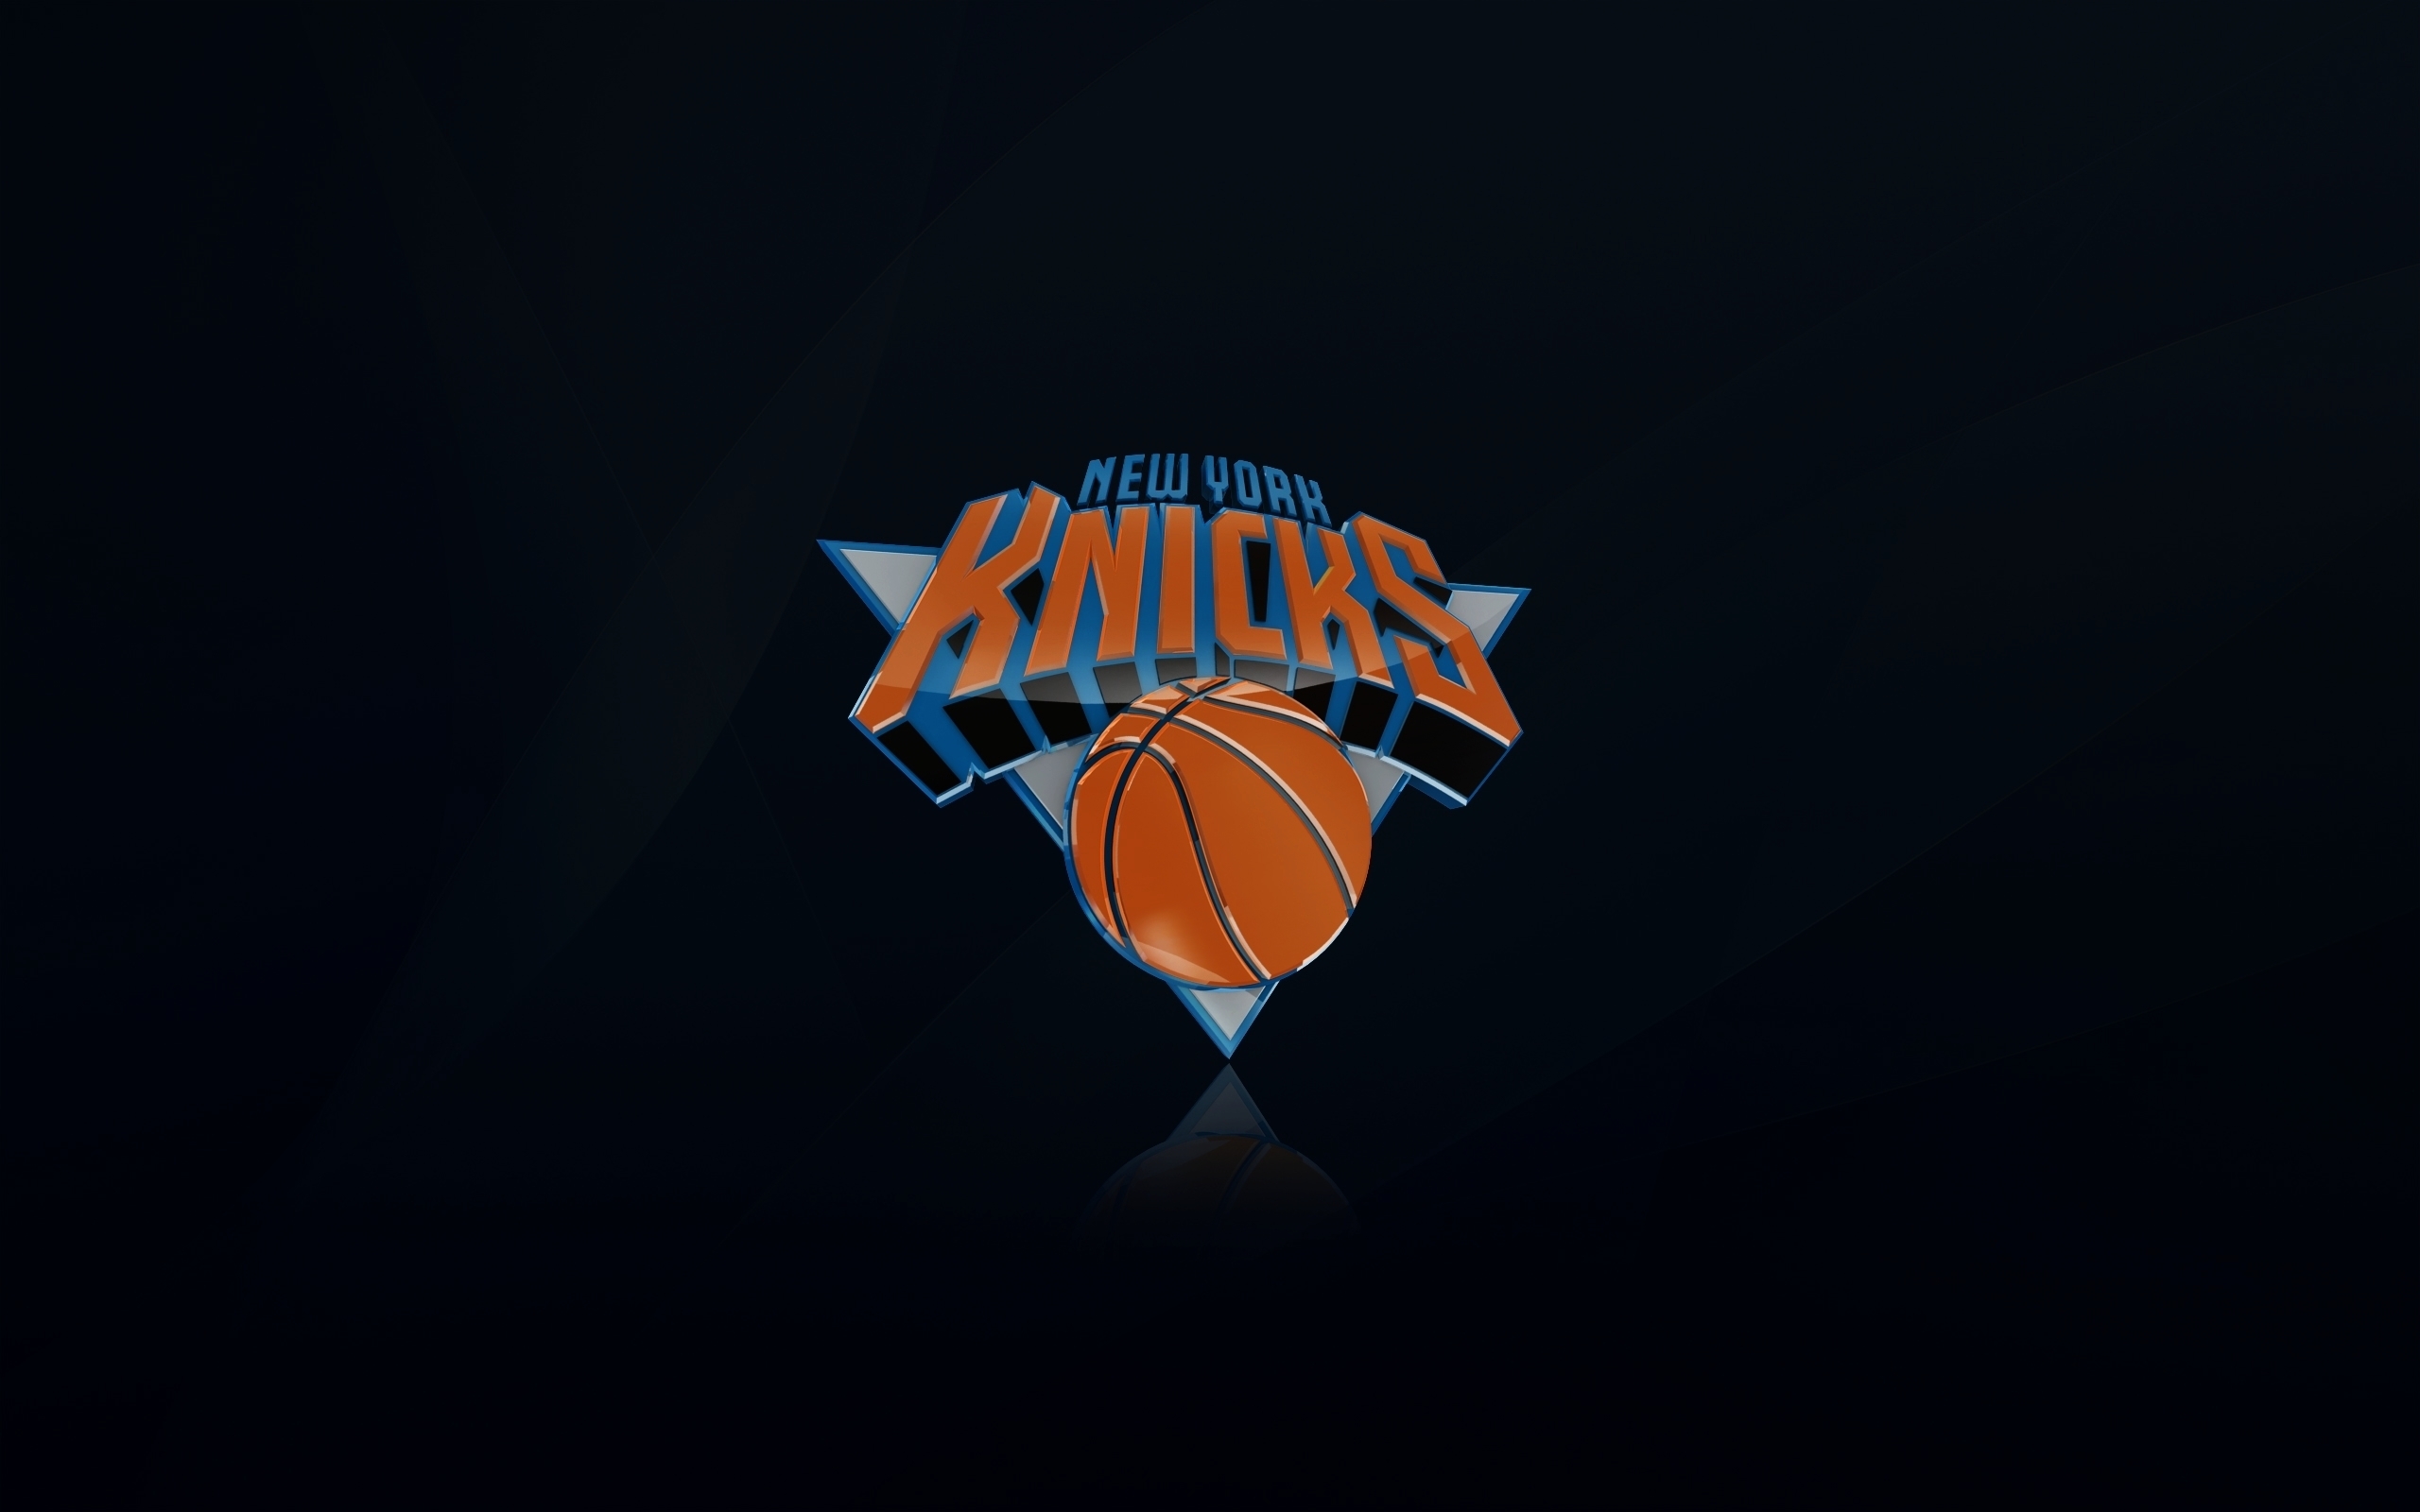 The New York Knickerbockers for 2560 x 1600 widescreen resolution